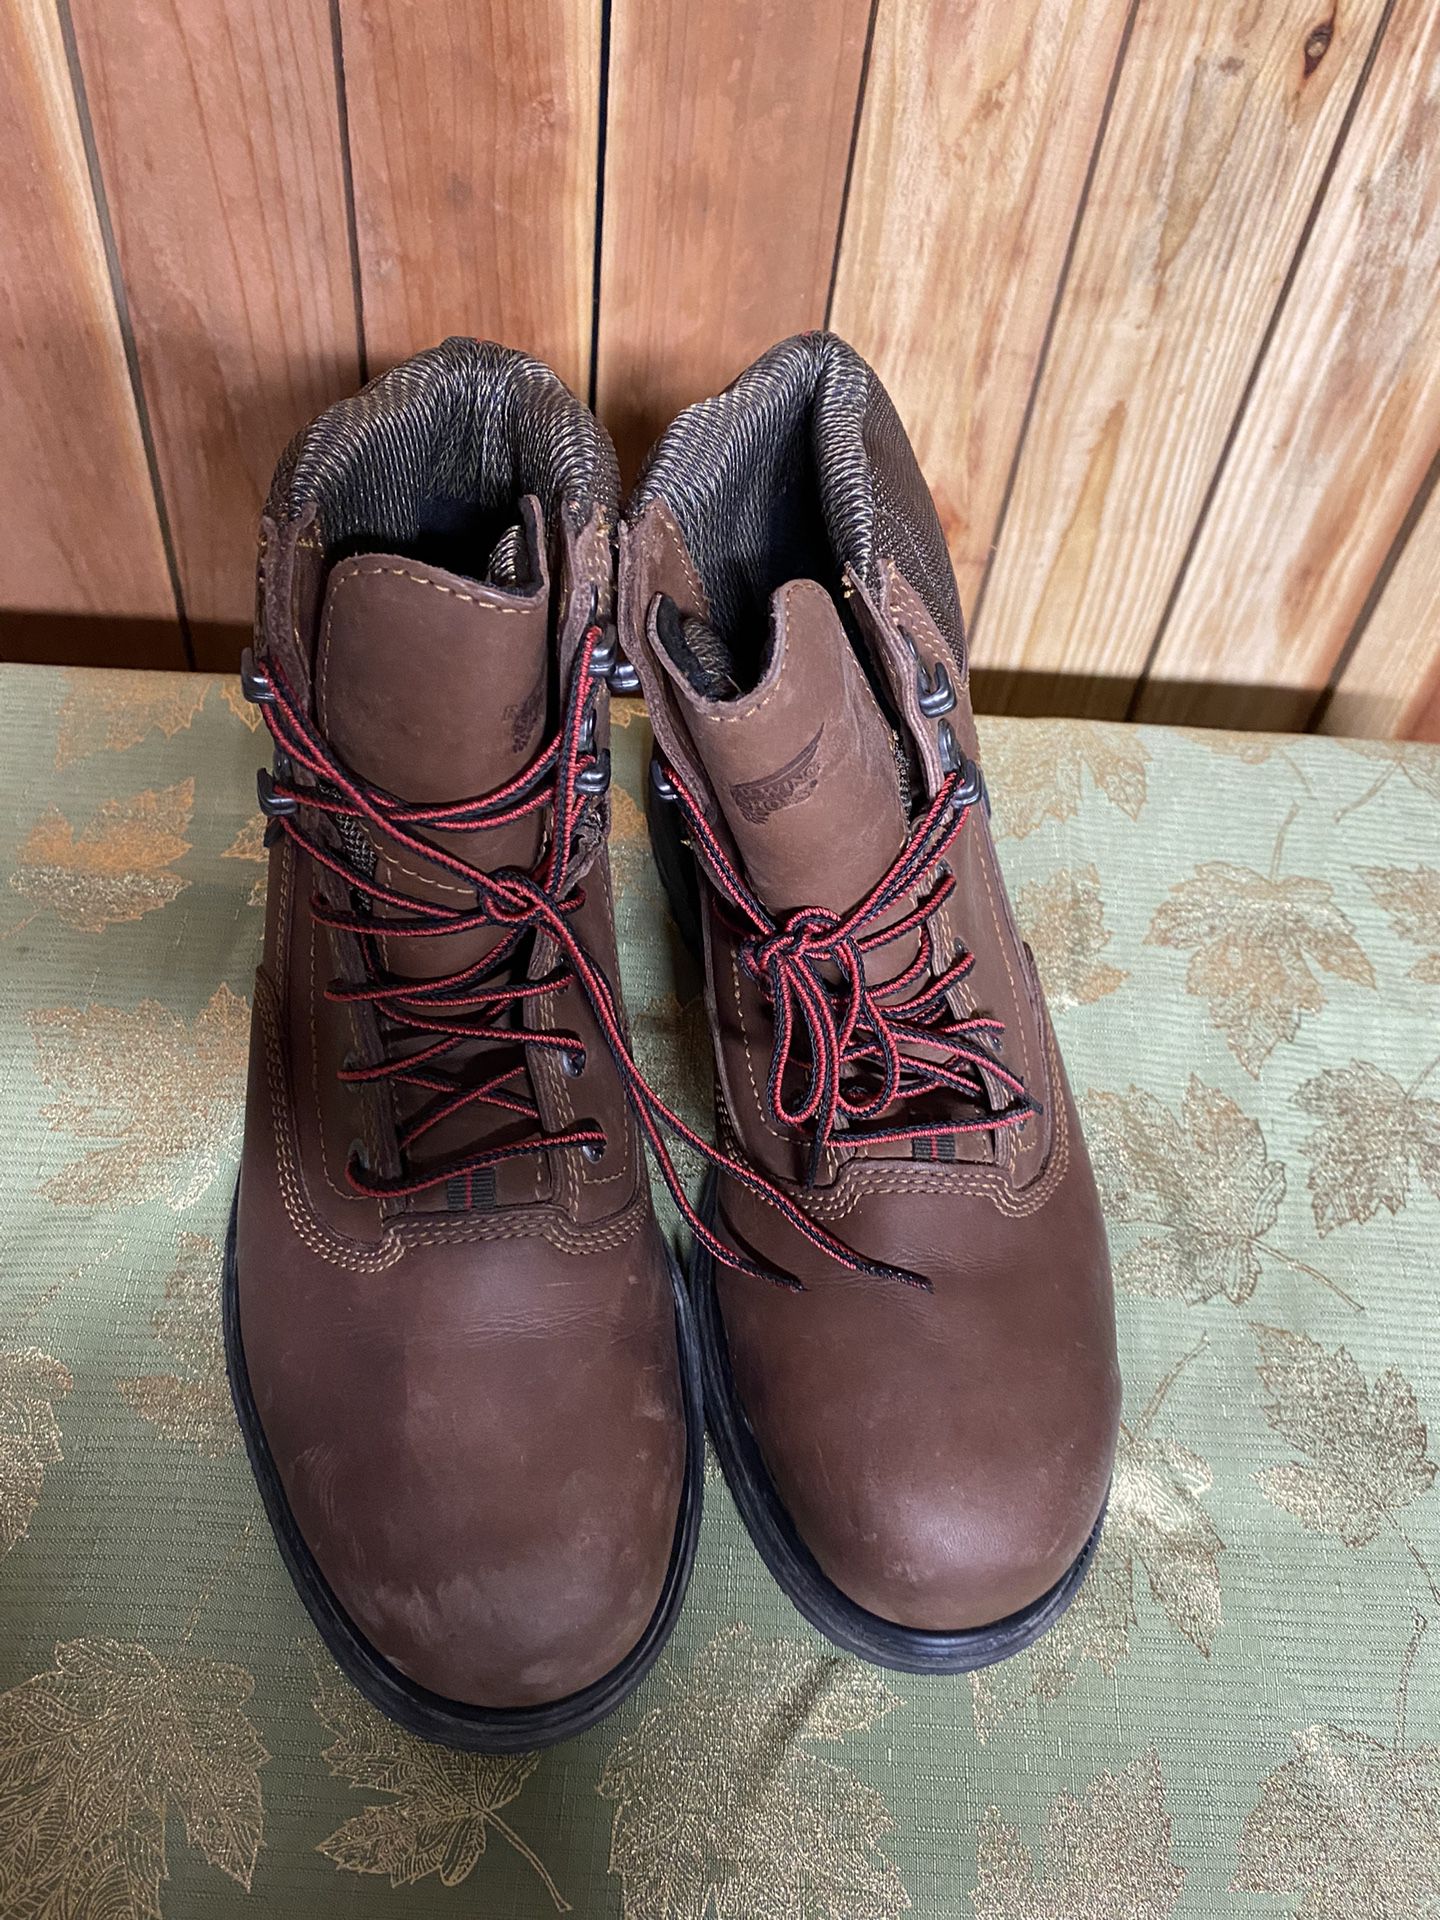 Redwing Boots Size 11 for Sale in Peoria, AZ - OfferUp